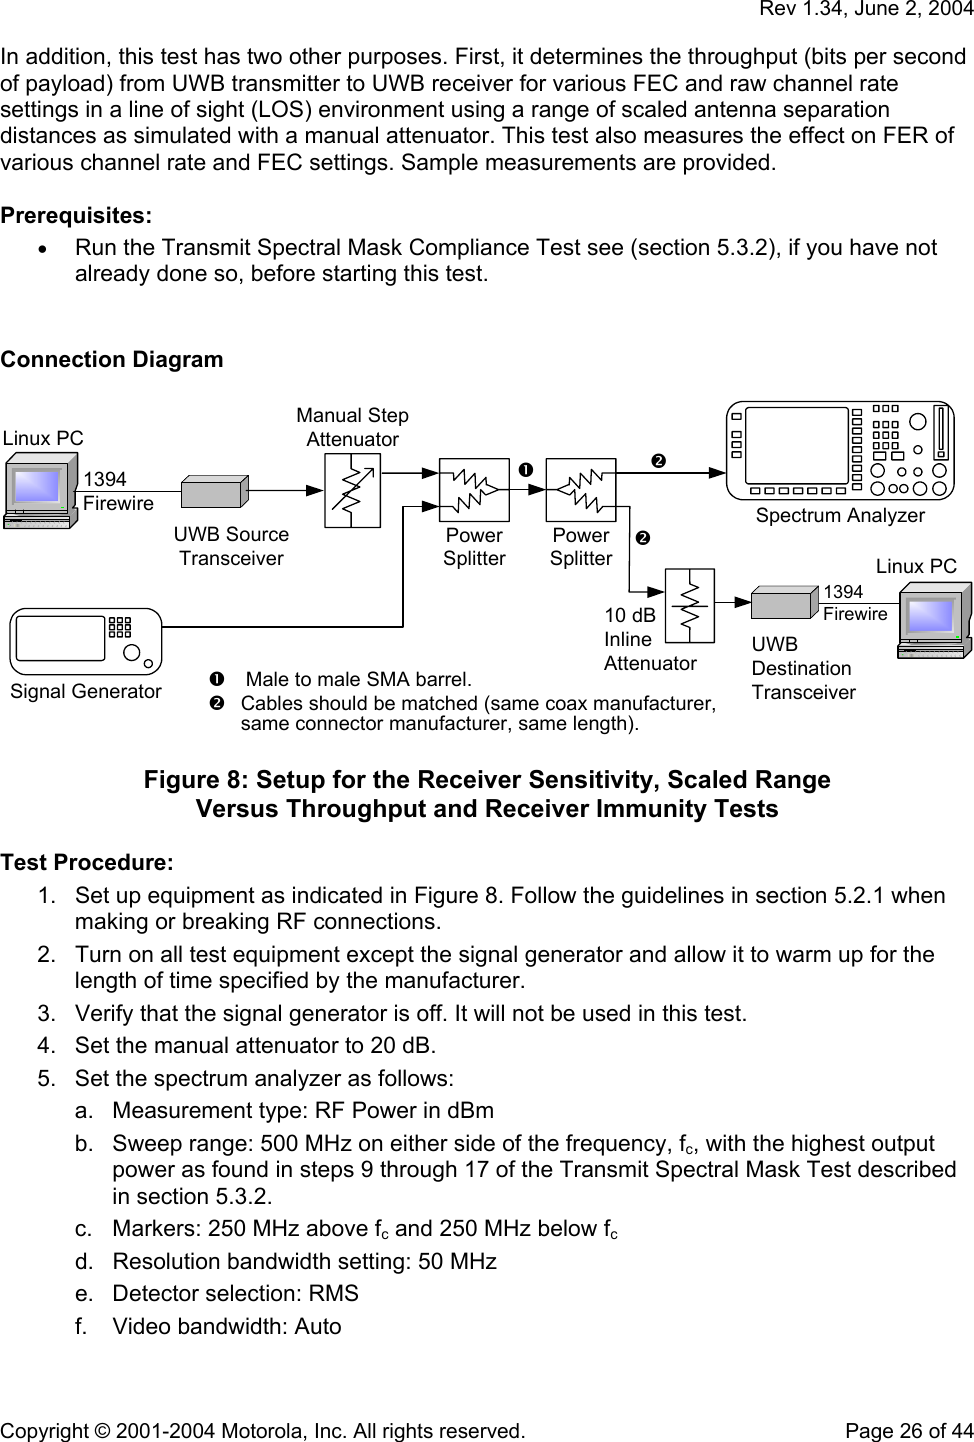   Rev 1.34, June 2, 2004  Copyright © 2001-2004 Motorola, Inc. All rights reserved.    Page 26 of 44 In addition, this test has two other purposes. First, it determines the throughput (bits per second of payload) from UWB transmitter to UWB receiver for various FEC and raw channel rate settings in a line of sight (LOS) environment using a range of scaled antenna separation distances as simulated with a manual attenuator. This test also measures the effect on FER of various channel rate and FEC settings. Sample measurements are provided.  Prerequisites: • Run the Transmit Spectral Mask Compliance Test see (section 5.3.2), if you have not already done so, before starting this test.   Connection Diagram  Linux PCUWBDestinationTransceiverLinux PC1394Firewire1394Firewire10 dBInlineAttenuatorCables should be matched (same coax manufacturer,same connector manufacturer, same length). Male to male SMA barrel.UWB SourceTransceiverSignal GeneratorManual StepAttenuatorPowerSplitterPowerSplitterSpectrum Analyzer  Figure 8: Setup for the Receiver Sensitivity, Scaled Range  Versus Throughput and Receiver Immunity Tests  Test Procedure: 1.  Set up equipment as indicated in Figure 8. Follow the guidelines in section 5.2.1 when making or breaking RF connections. 2.  Turn on all test equipment except the signal generator and allow it to warm up for the length of time specified by the manufacturer. 3.  Verify that the signal generator is off. It will not be used in this test. 4.  Set the manual attenuator to 20 dB. 5.  Set the spectrum analyzer as follows: a.  Measurement type: RF Power in dBm b.  Sweep range: 500 MHz on either side of the frequency, fc, with the highest output power as found in steps 9 through 17 of the Transmit Spectral Mask Test described in section 5.3.2. c.  Markers: 250 MHz above fc and 250 MHz below fc d.  Resolution bandwidth setting: 50 MHz e.  Detector selection: RMS f.  Video bandwidth: Auto 